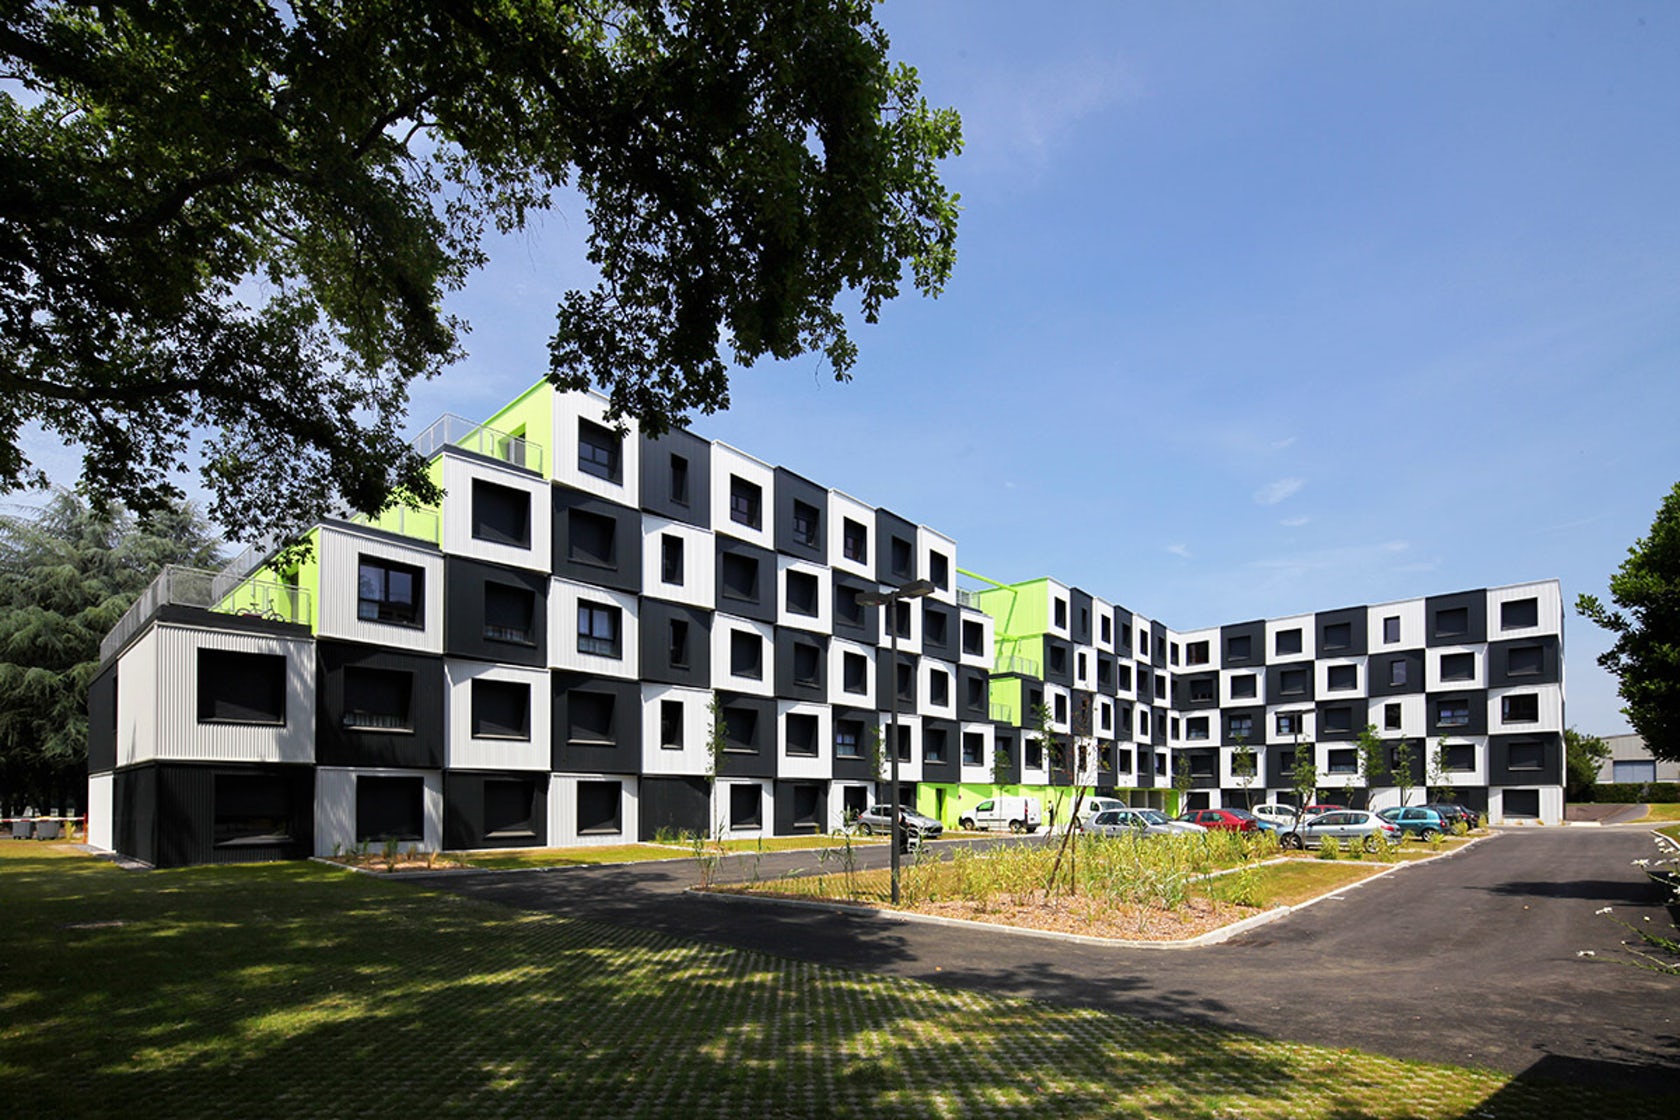 How Architects Design Better Students’ Housing